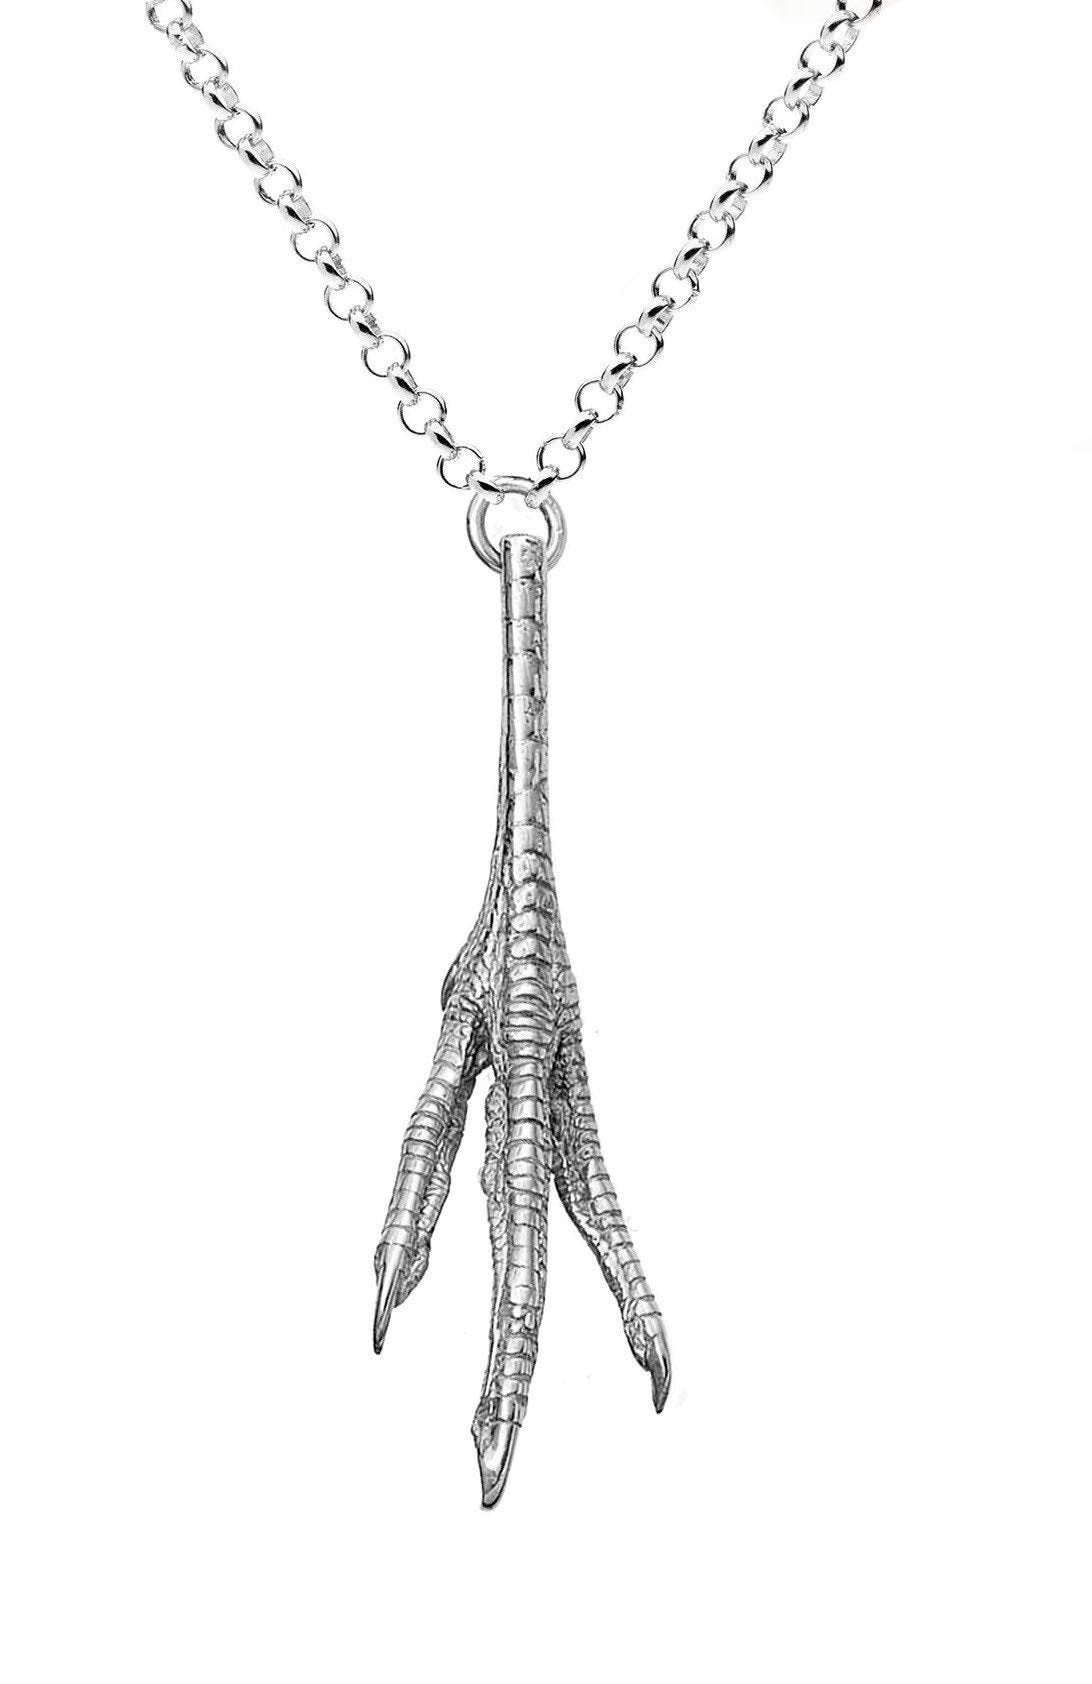 Iconic 925 silver Chicken Feet necklace from David&Martin Jewellery. The collection was inspired by a beautiful girl spotted by the designers in Shanghai underground. The girl was munching fried chicken feet and simultaneously flicking through French Vogue